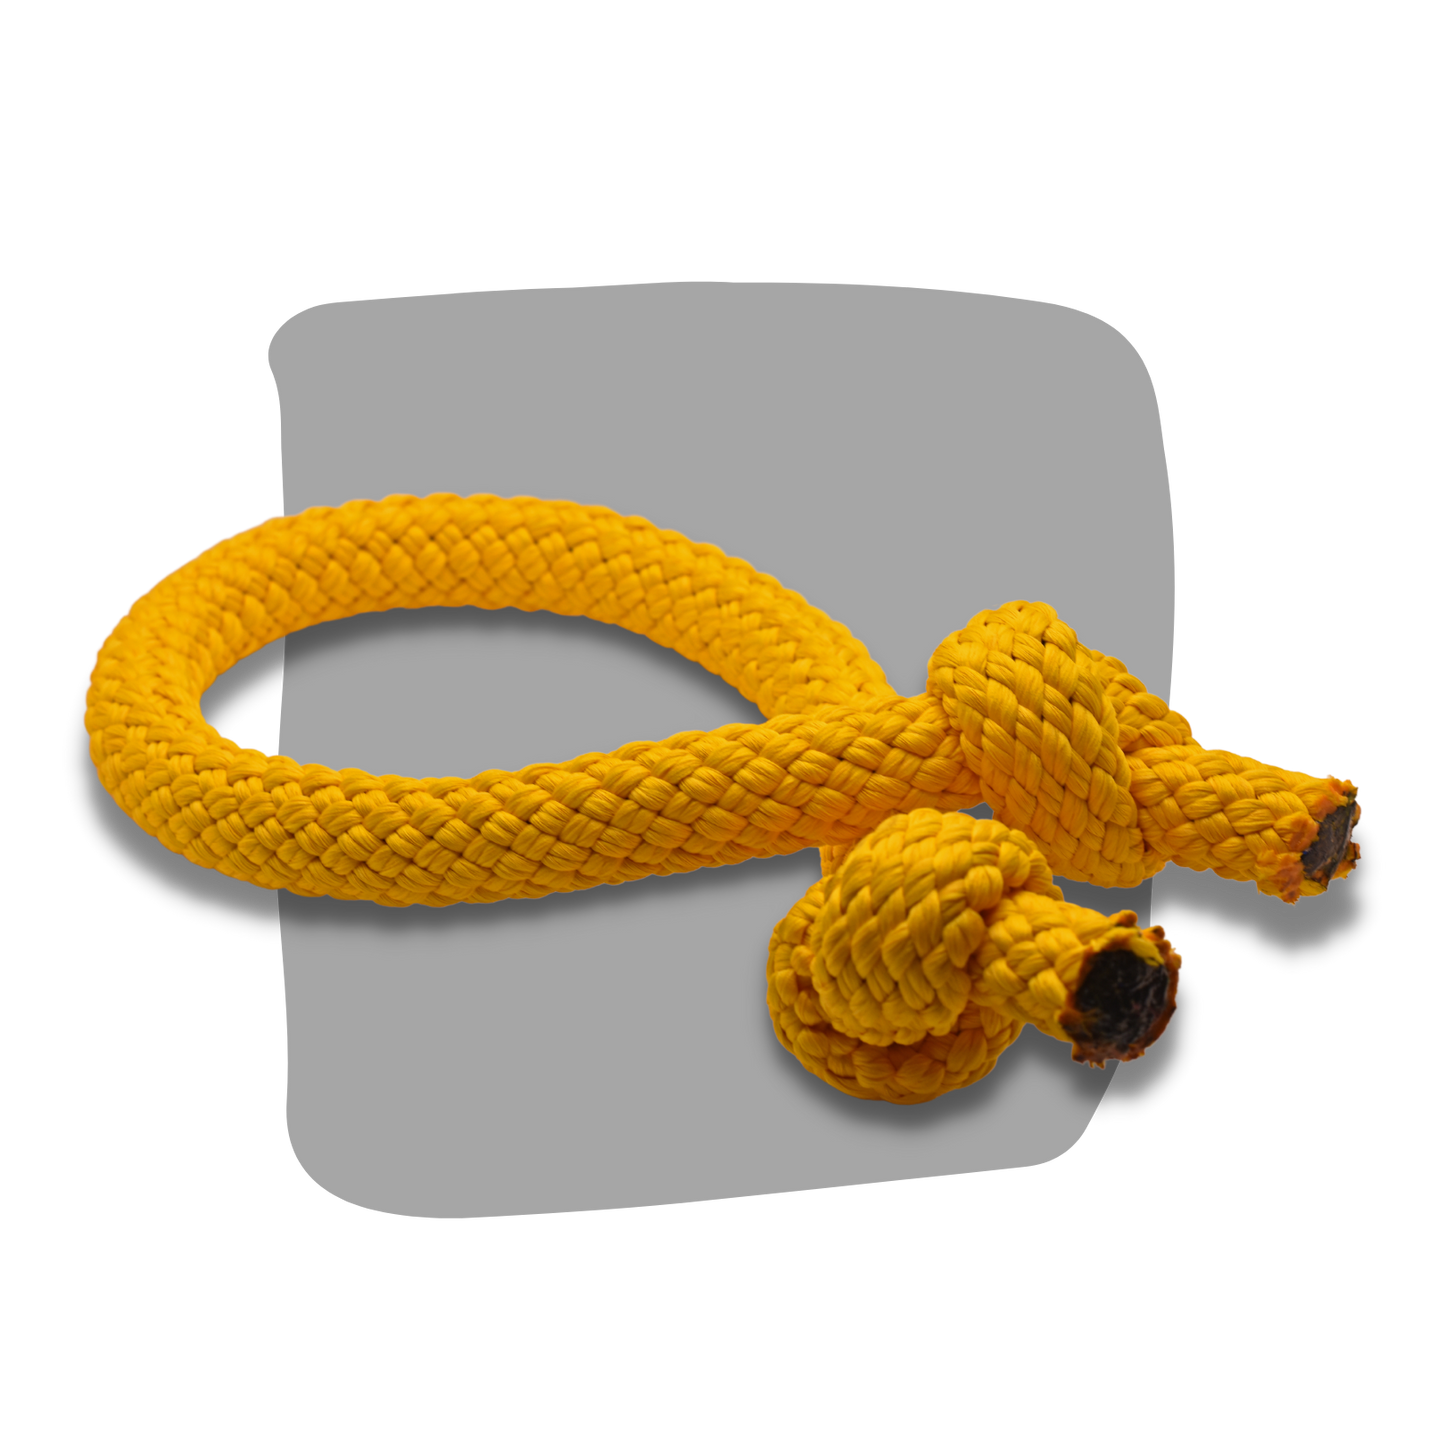 Super Thick Rope Tug Toy